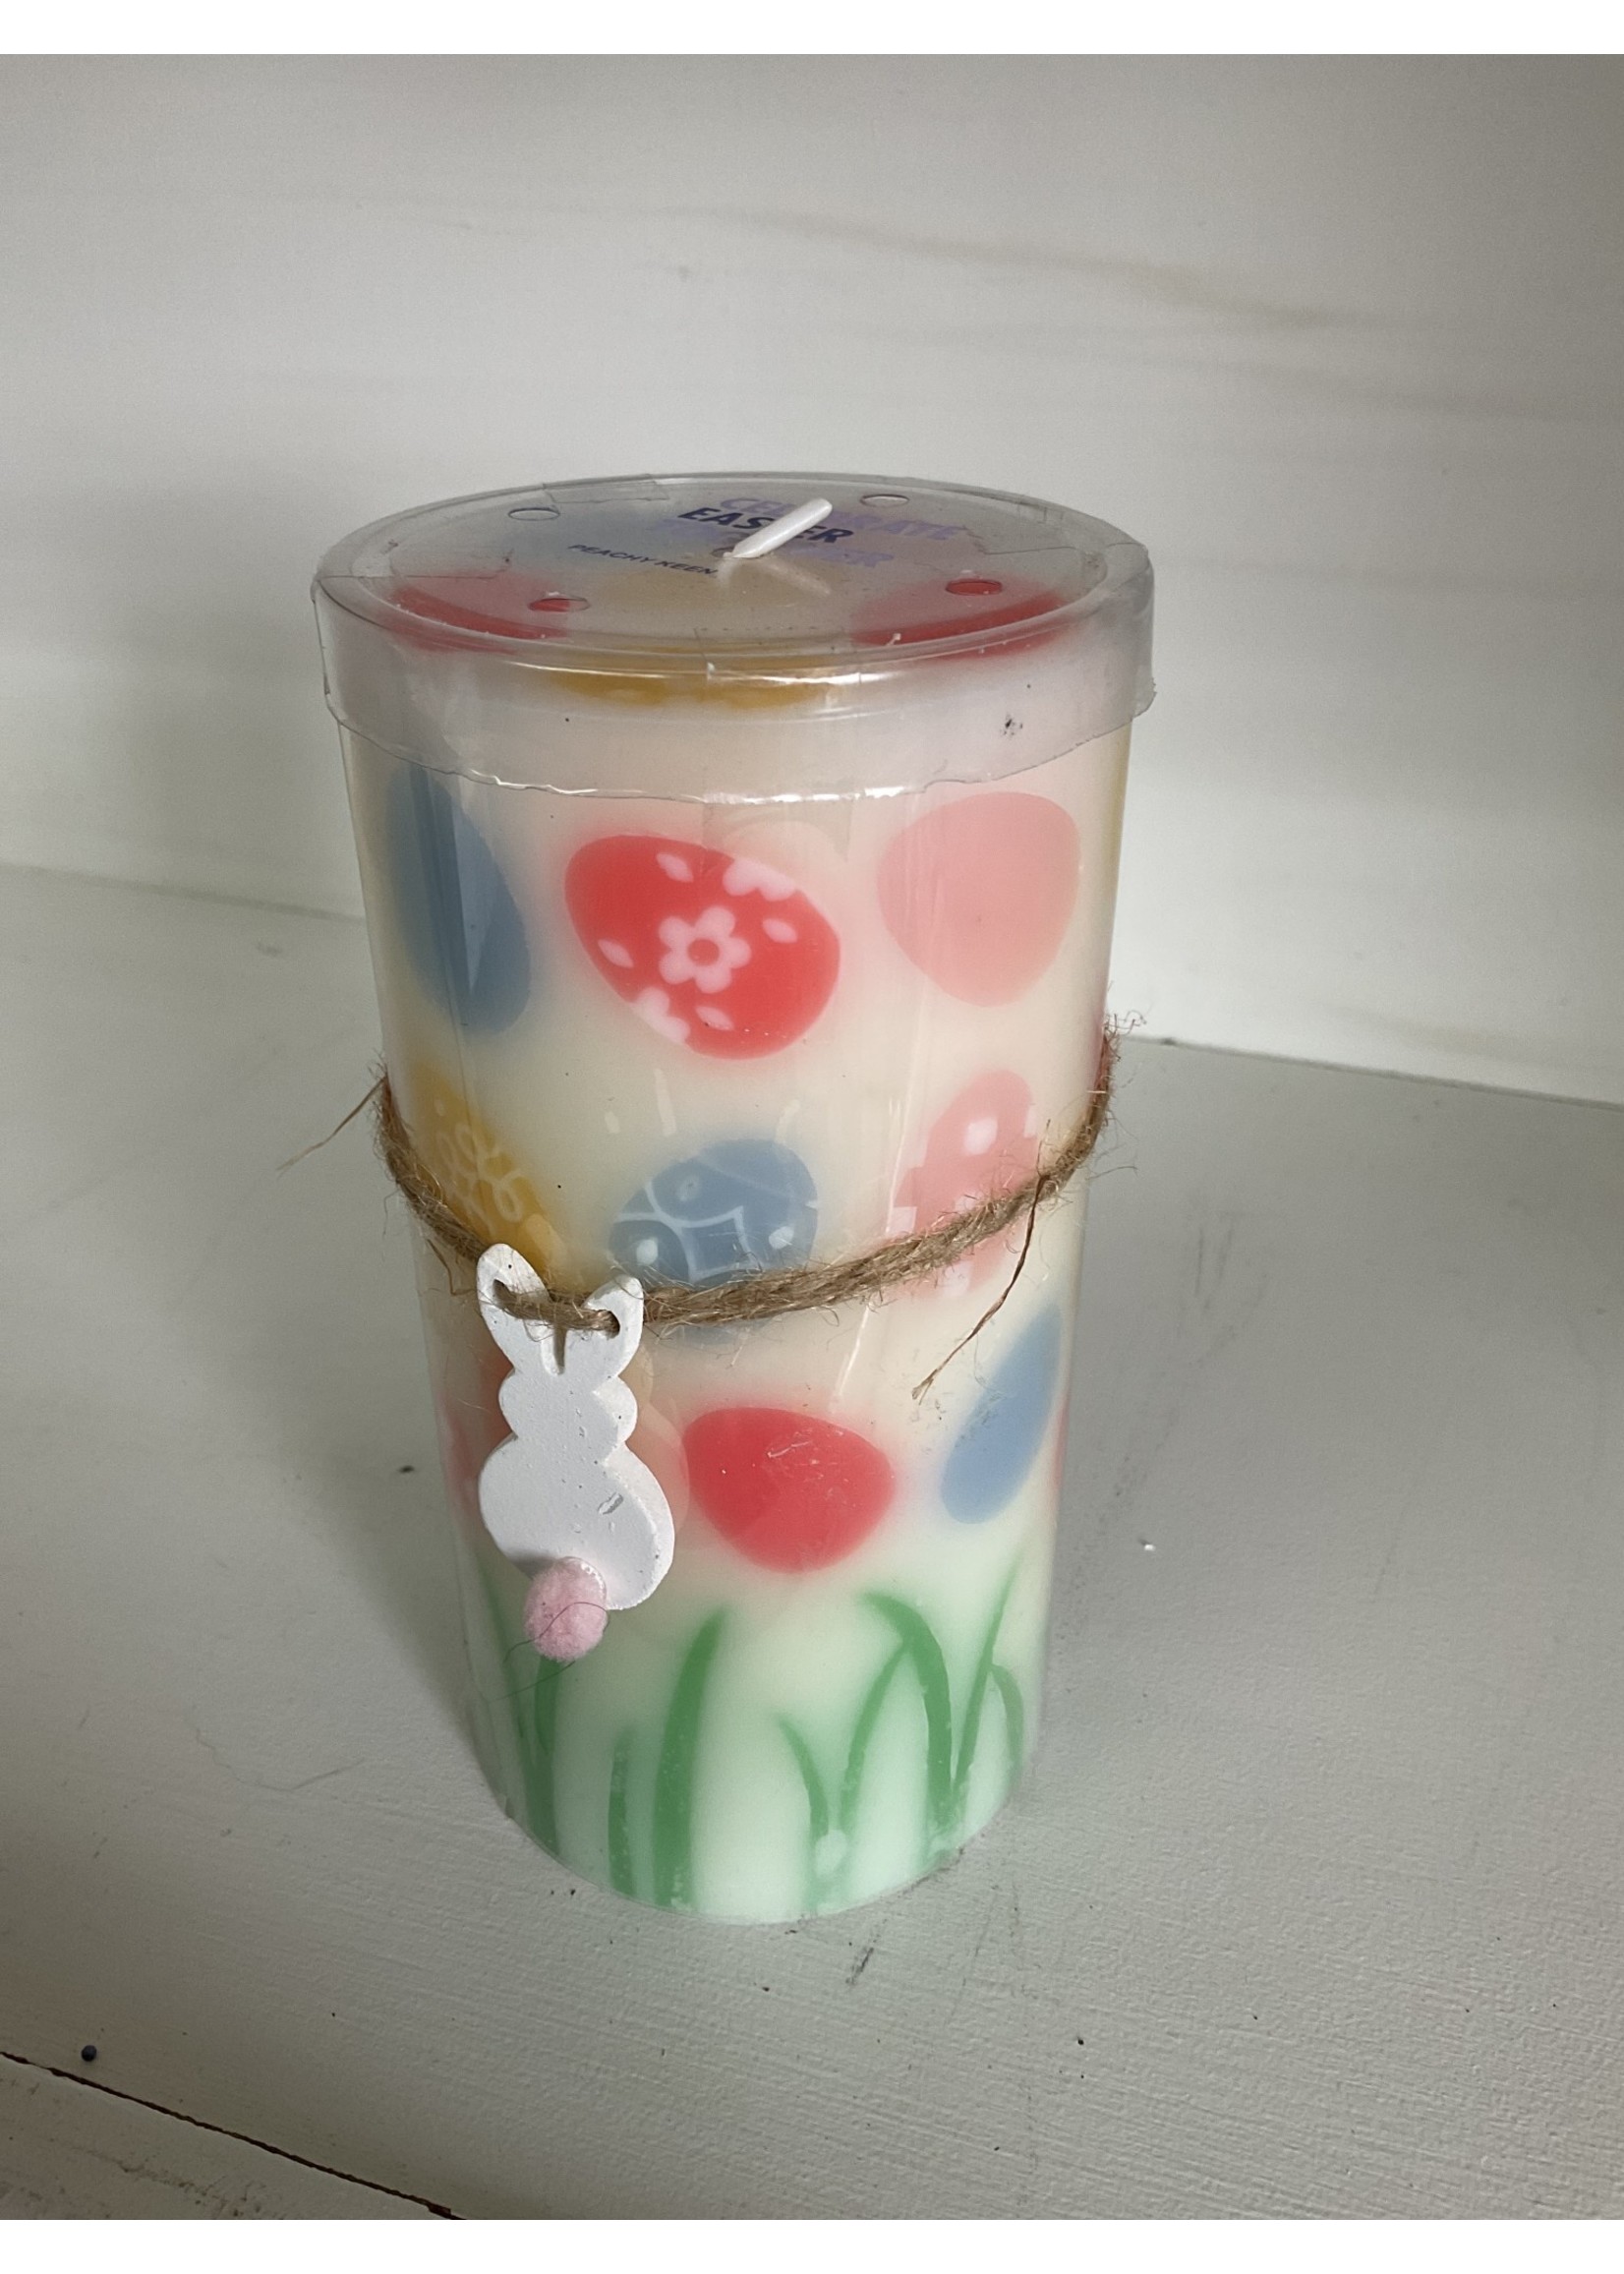 My New Favorite Thing Candle White w/Colorful Eggs and Rabbit on String